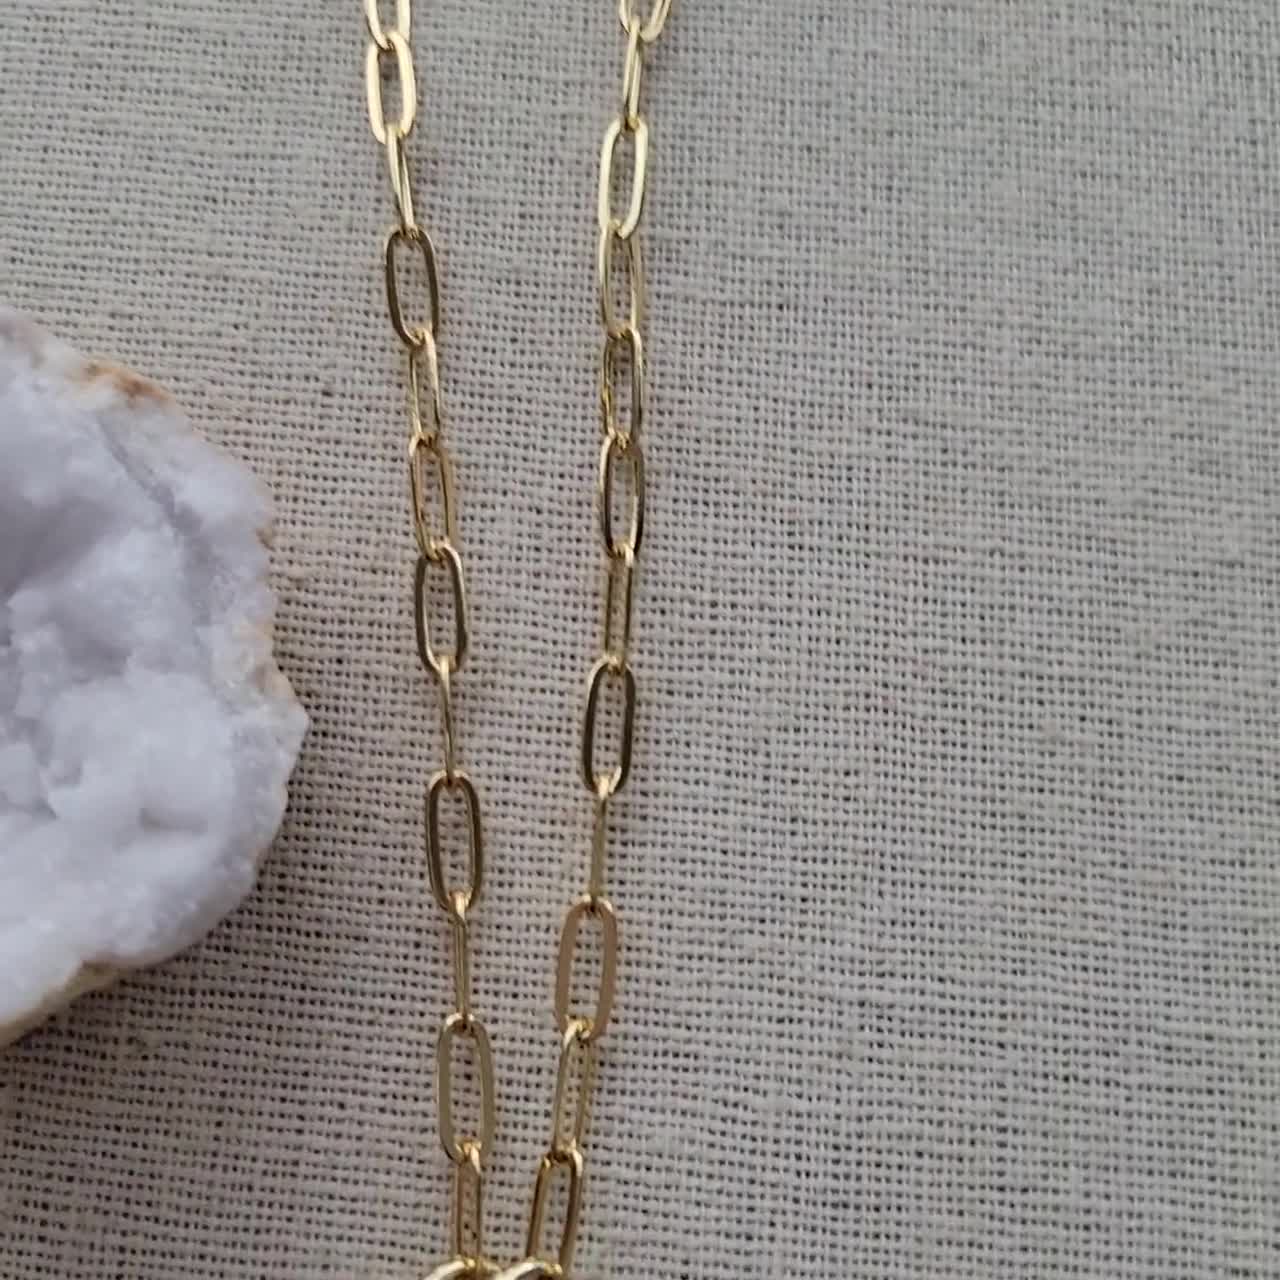 14k Gold Filled Lock Necklace, Toggle Clasp Necklace, Lock Charm Necklace,  Paperclip Chain Necklace, Birthday Gifts for Her, Modern Jewelry 